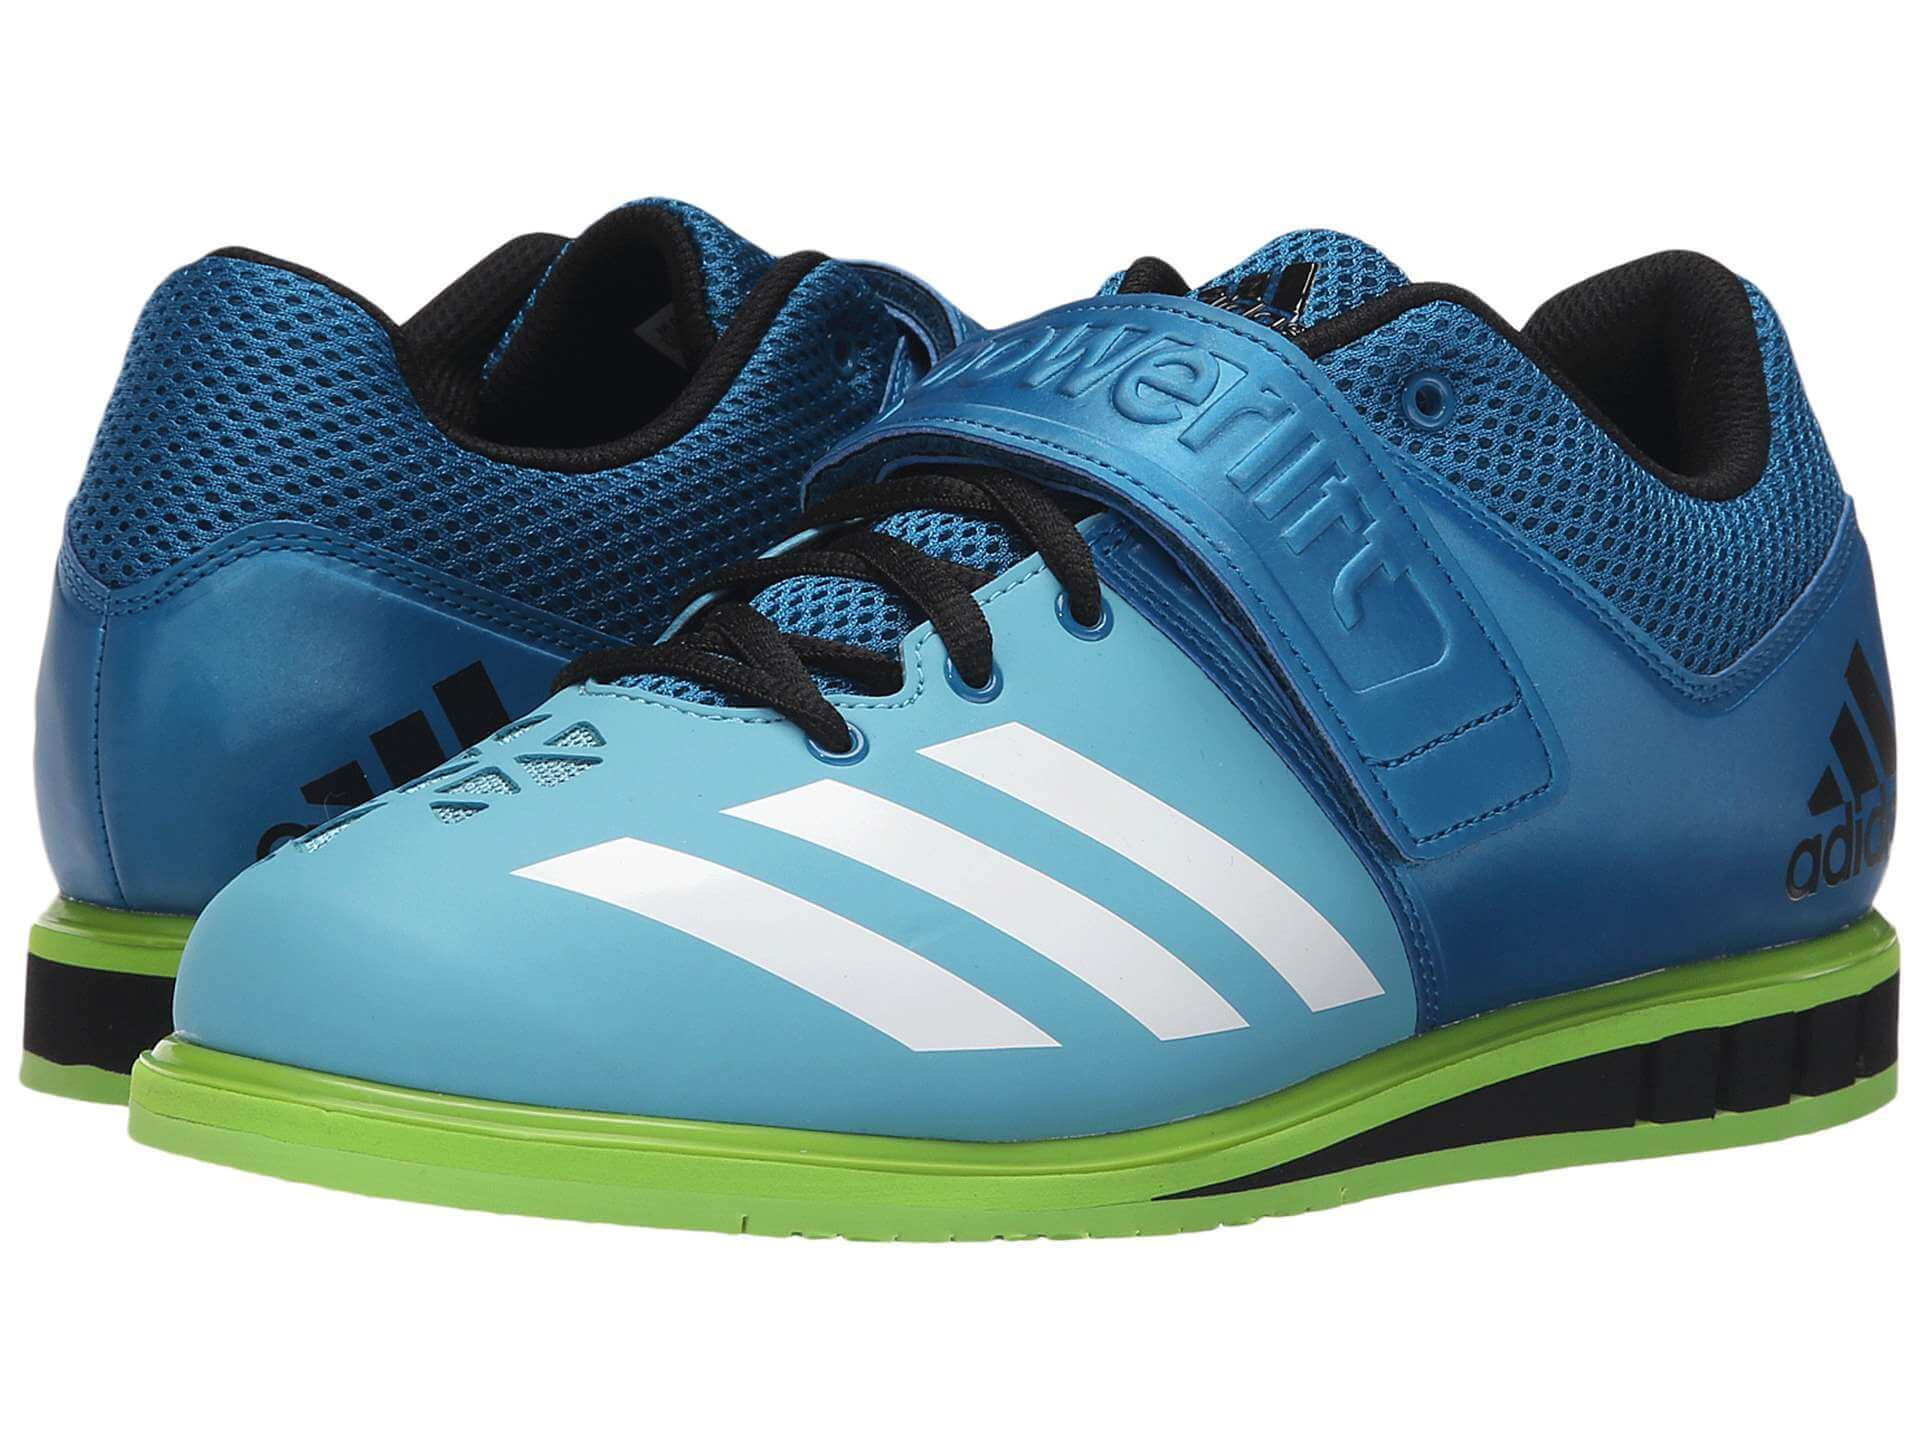 Adidas Powerlift 3.0 Review - Weight 